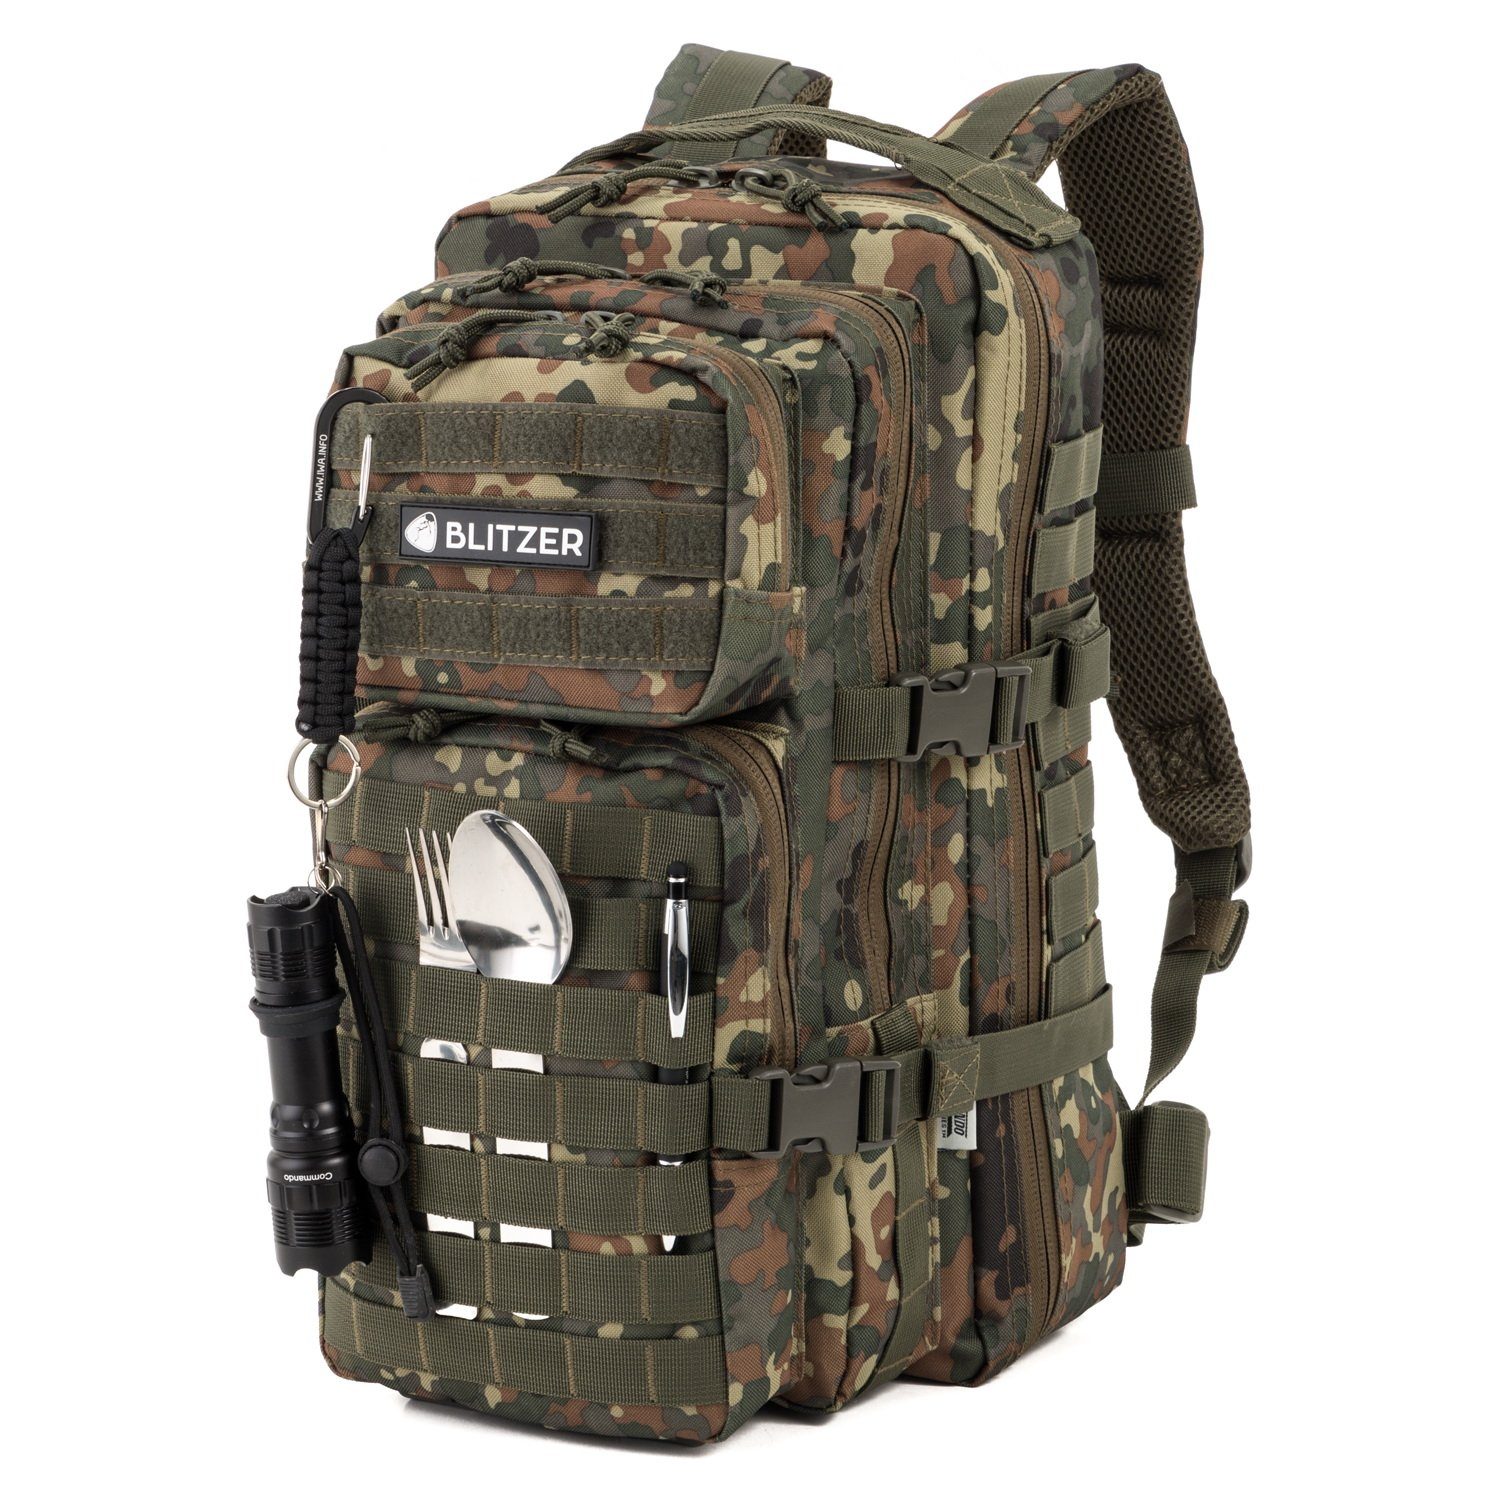 Commando-Industries Rucksack US Army Assault Pack I 30L